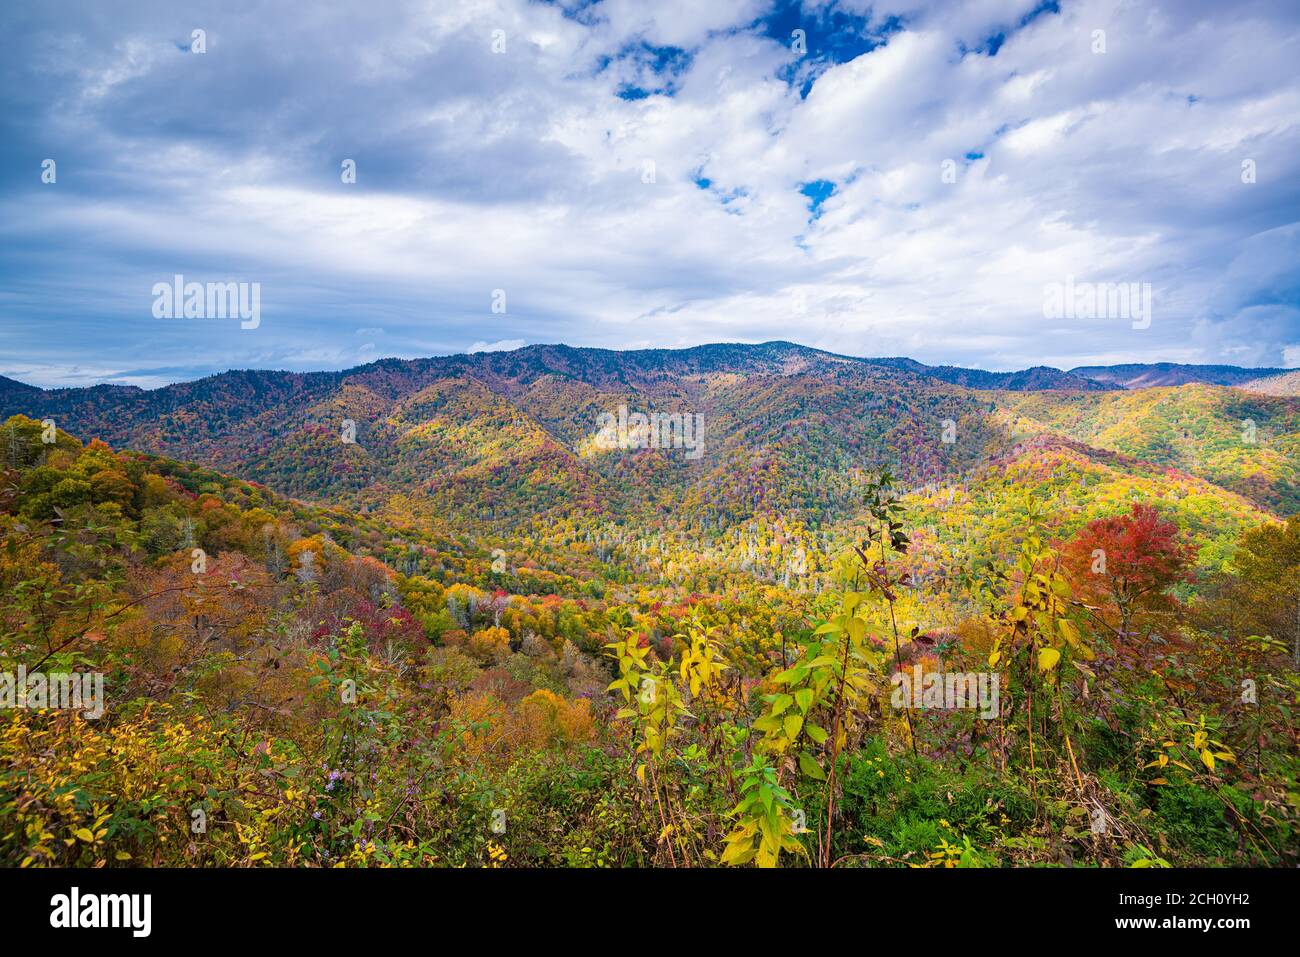 Great Smoky Mountains National Park, Tennessee, USA im Herbst. Stockfoto